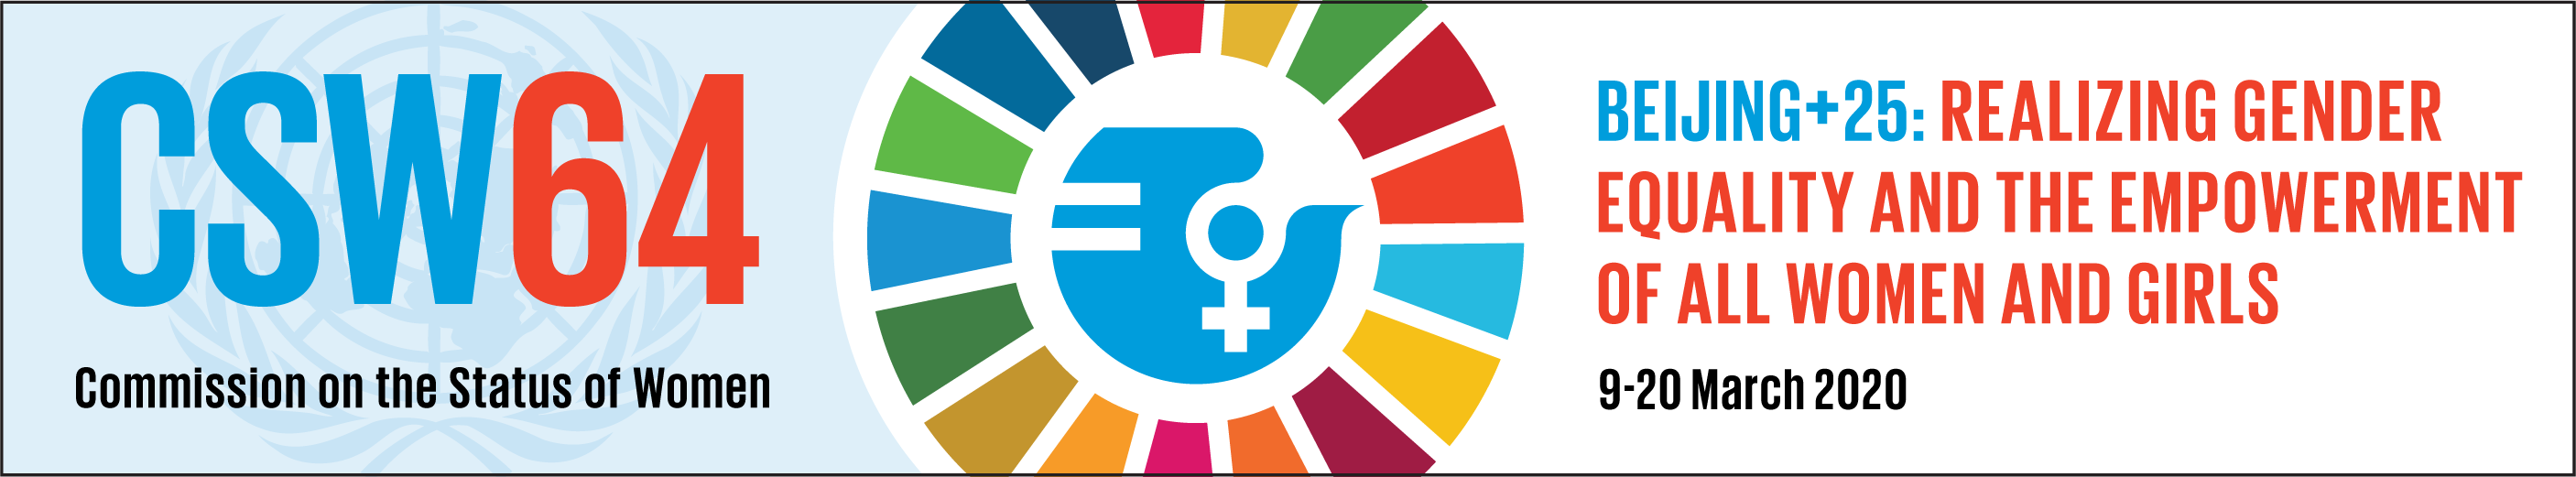 CSW64 banner: Commission on the Status of Women, 9-20 March